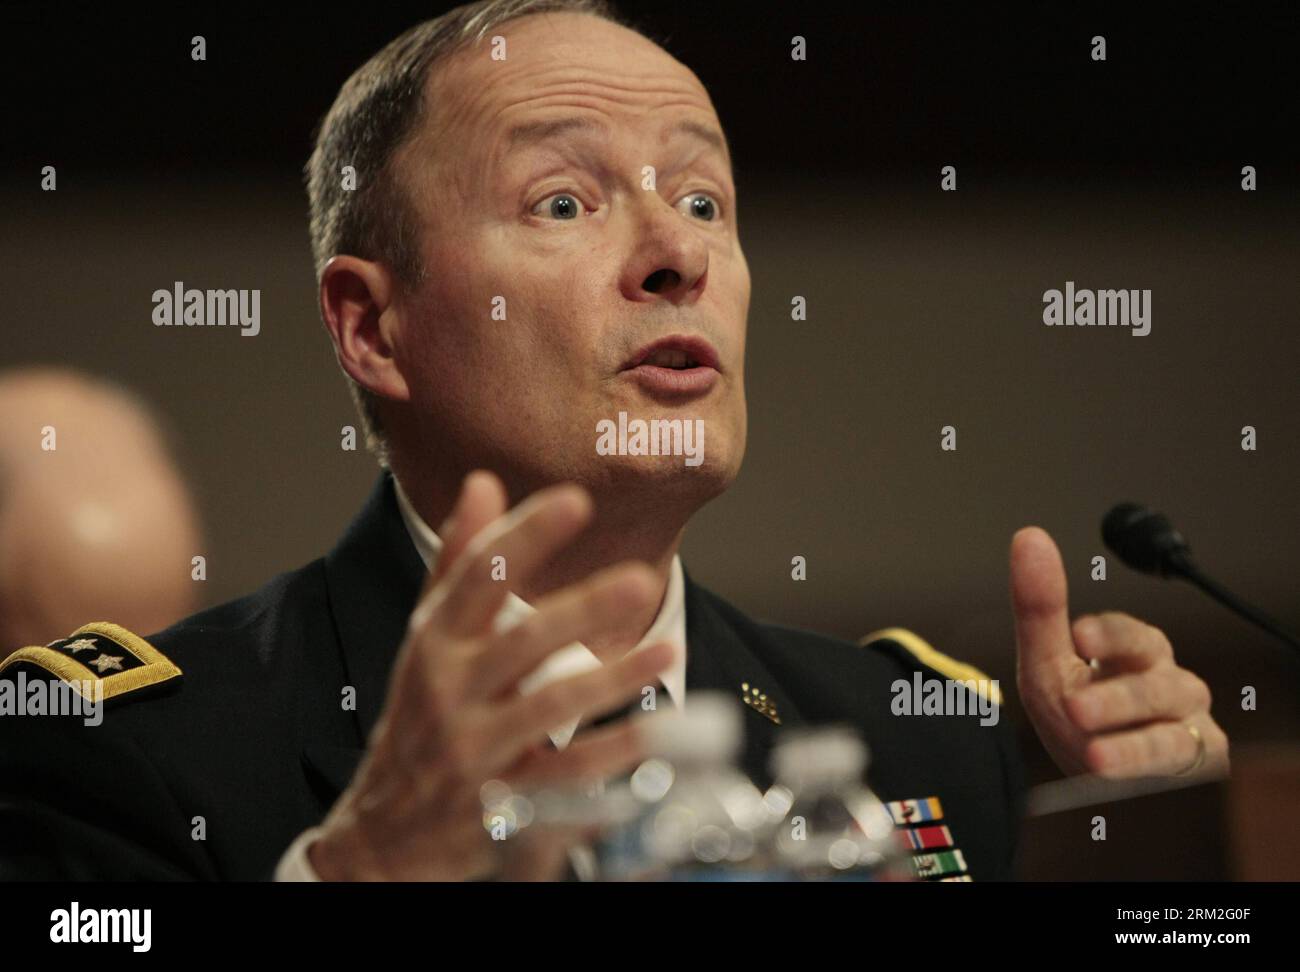 130612 -- WASHINGTON D.C., June 12, 2013 Xinhua -- U.S. Army Gen. Keith Alexander, commander of the U.S. Cyber Command, director of National Security Agency NSA, testifies before a Senate Appropriations Committee hearing in Washington D.C. on June 12, 2013. Xinhua/Fang Zhe US-WASHINGTON-POLITICS-ARMY-HEARING PUBLICATIONxNOTxINxCHN Stock Photo